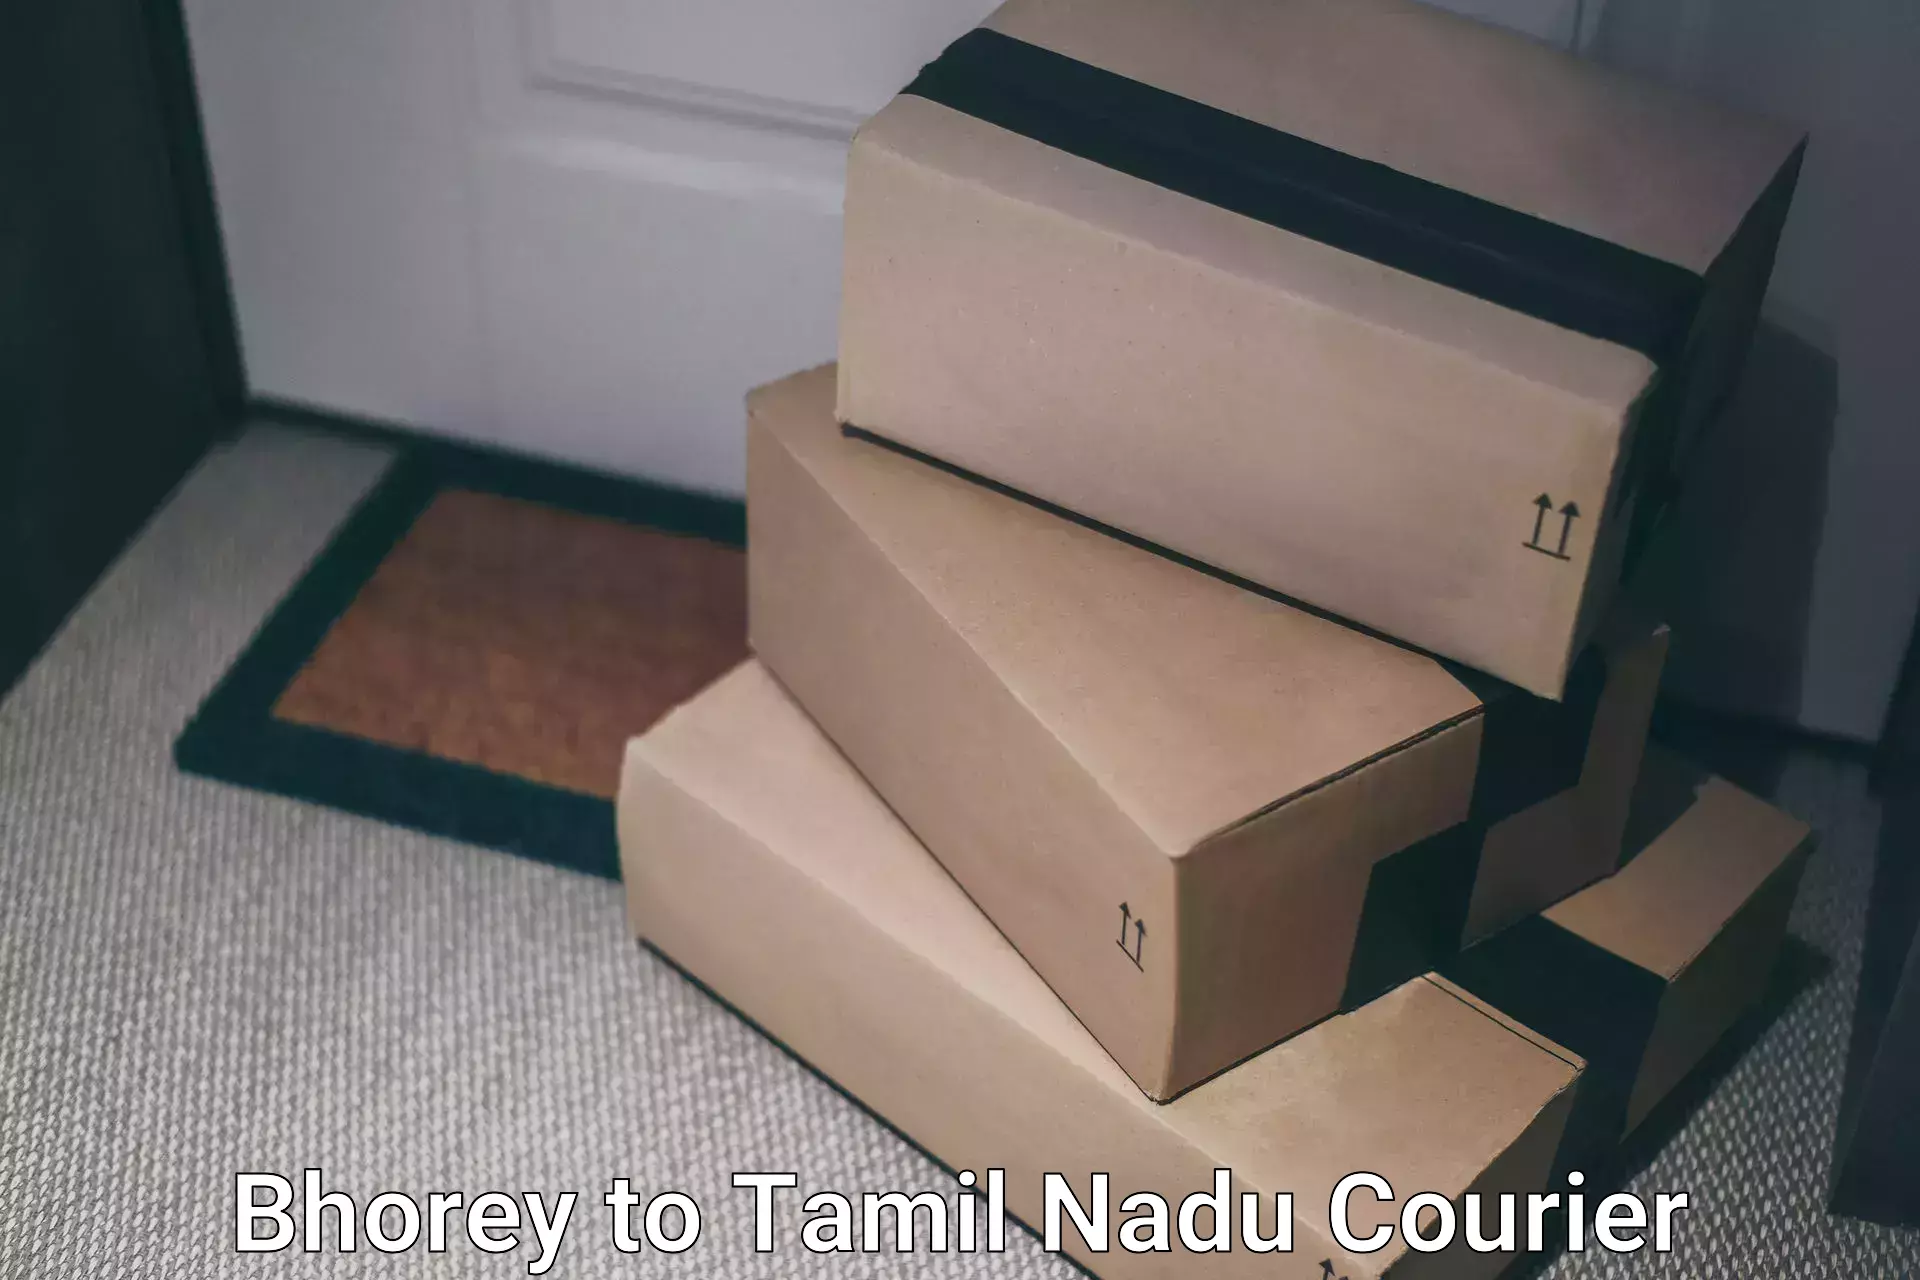 Full-service courier options Bhorey to Tamil Nadu